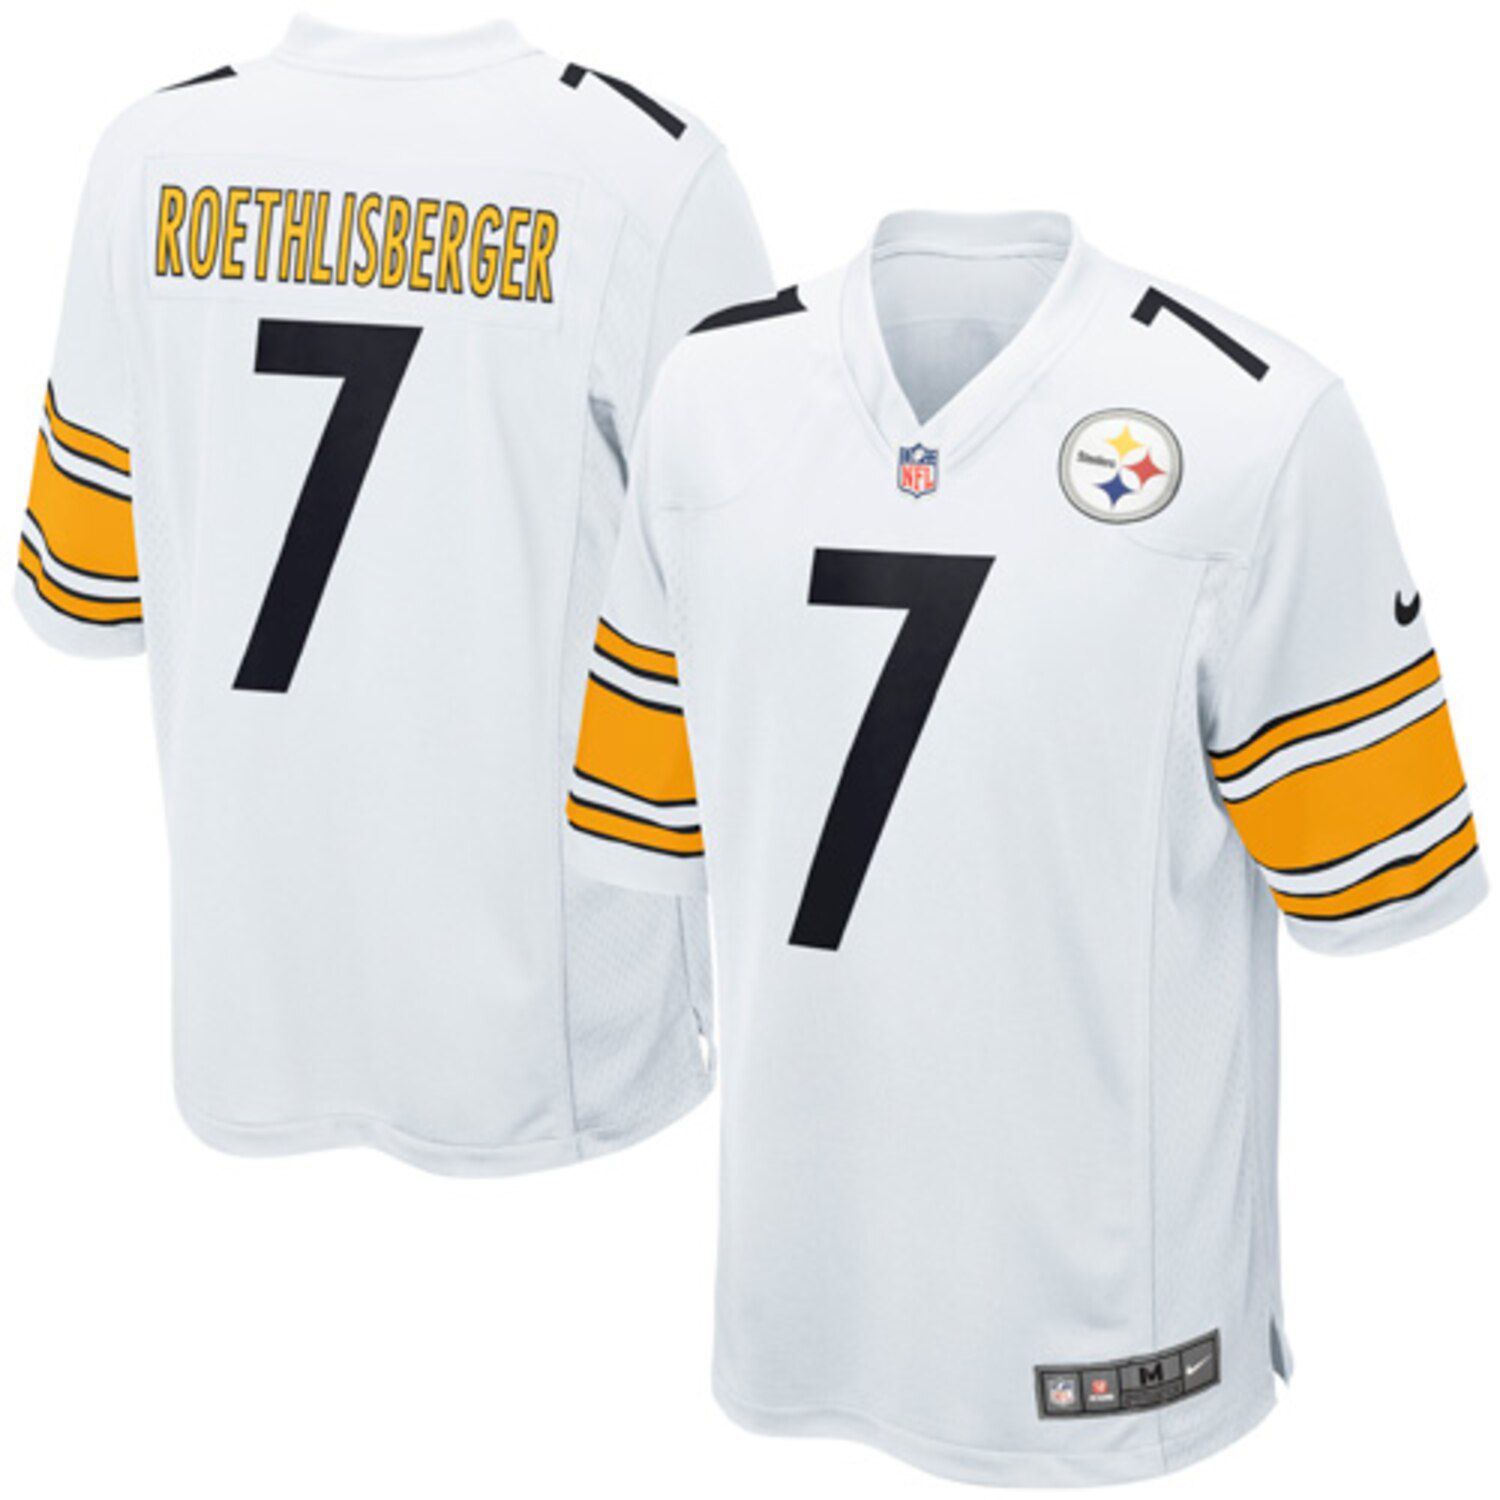 pittsburgh steelers outfits